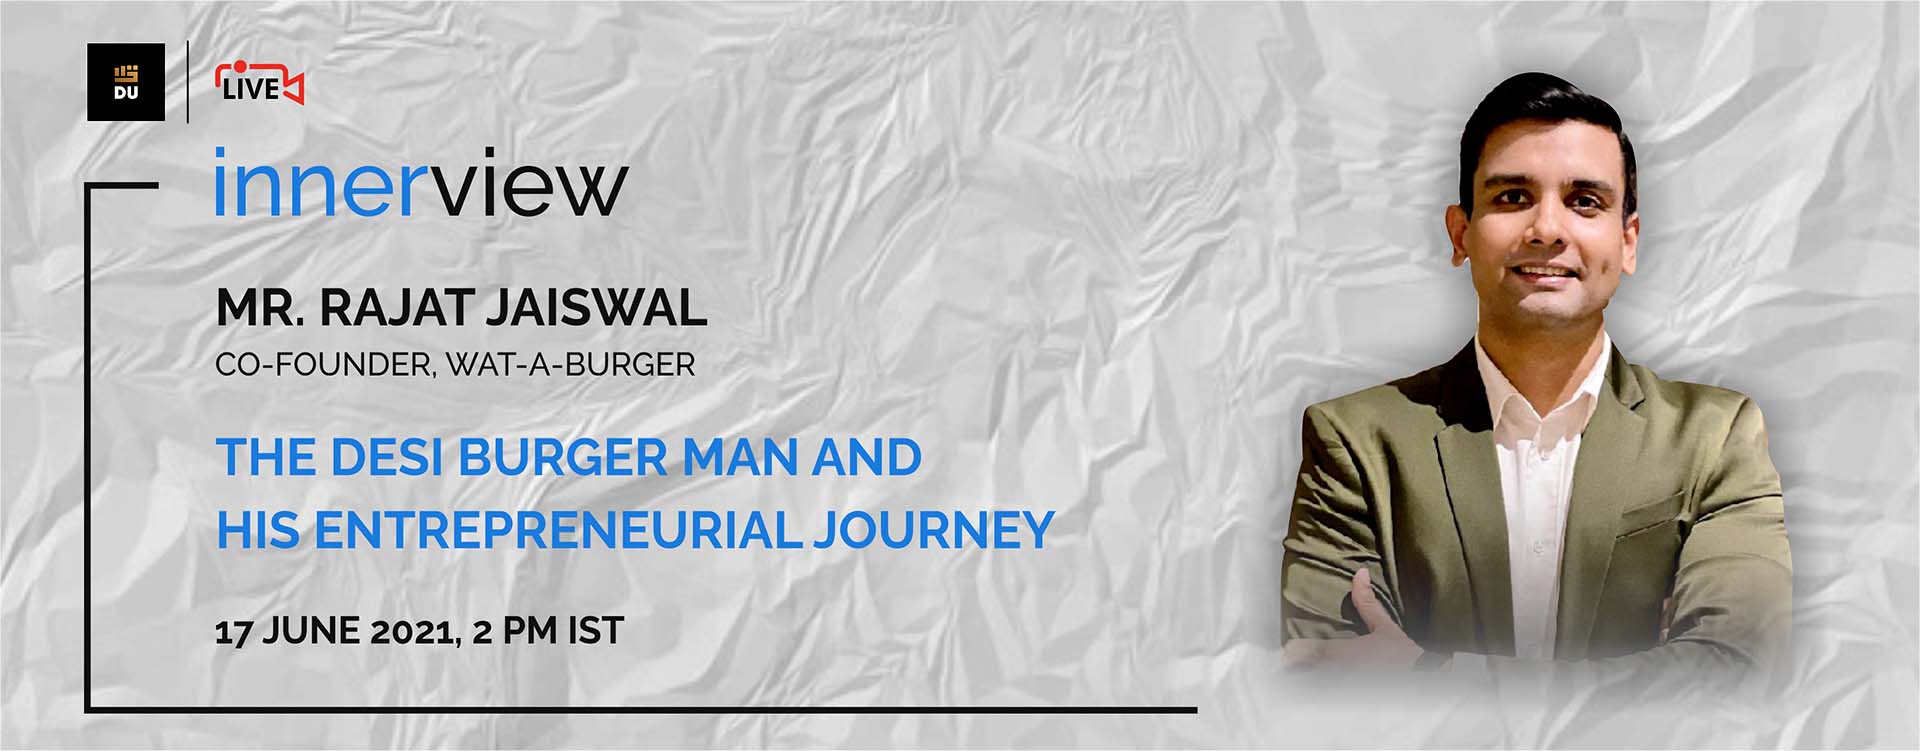 A key discussion on the entrepreneurial journey of Rajat Jaiswal